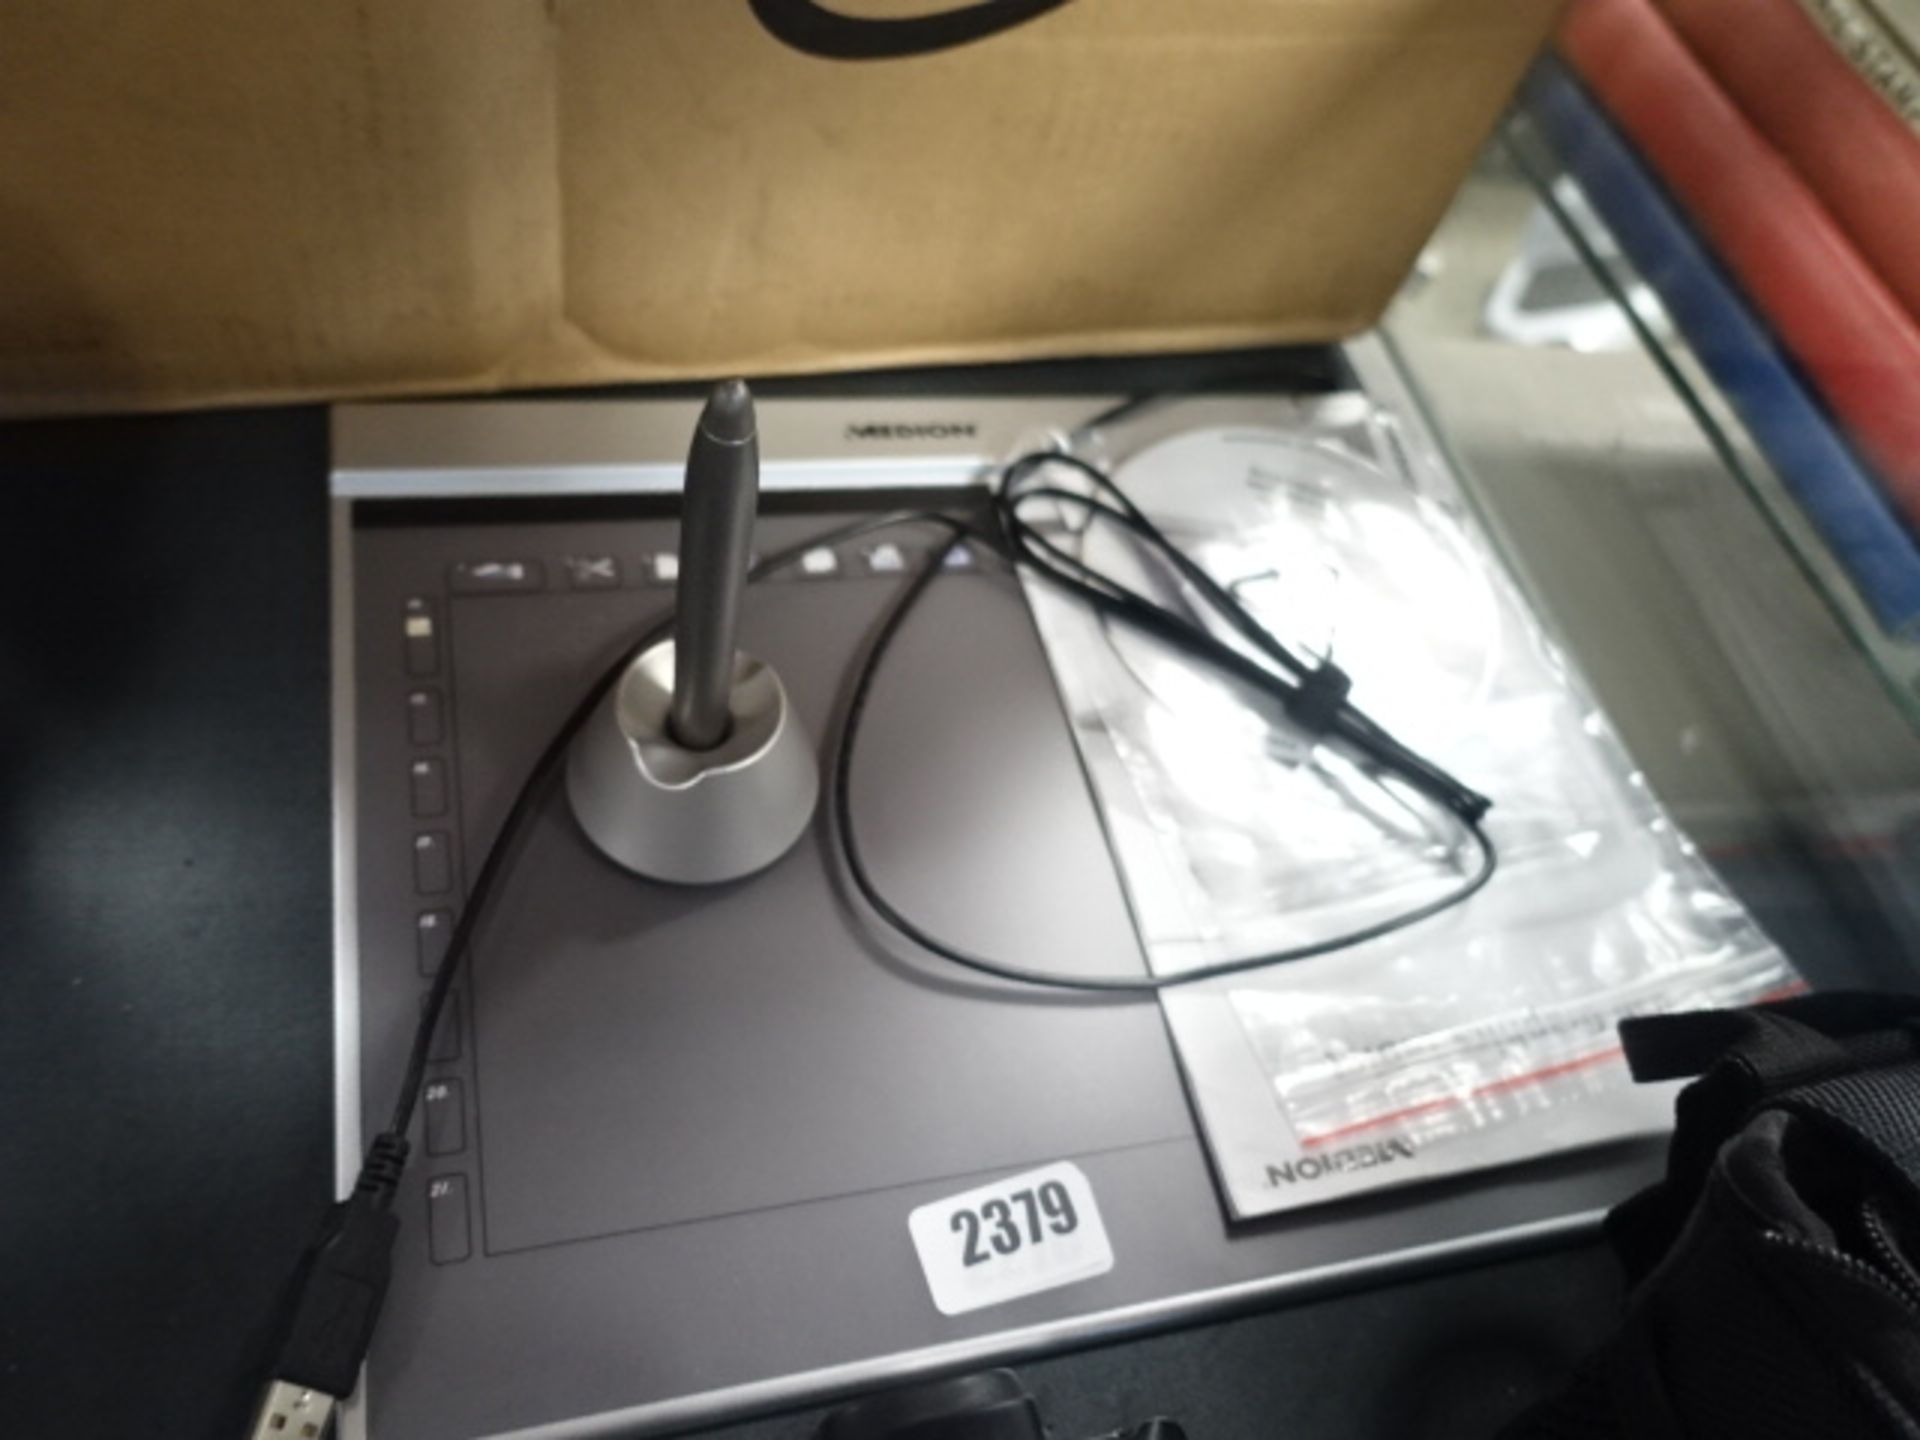 2270 - Medion graphics tablet with pin accessory and software disc